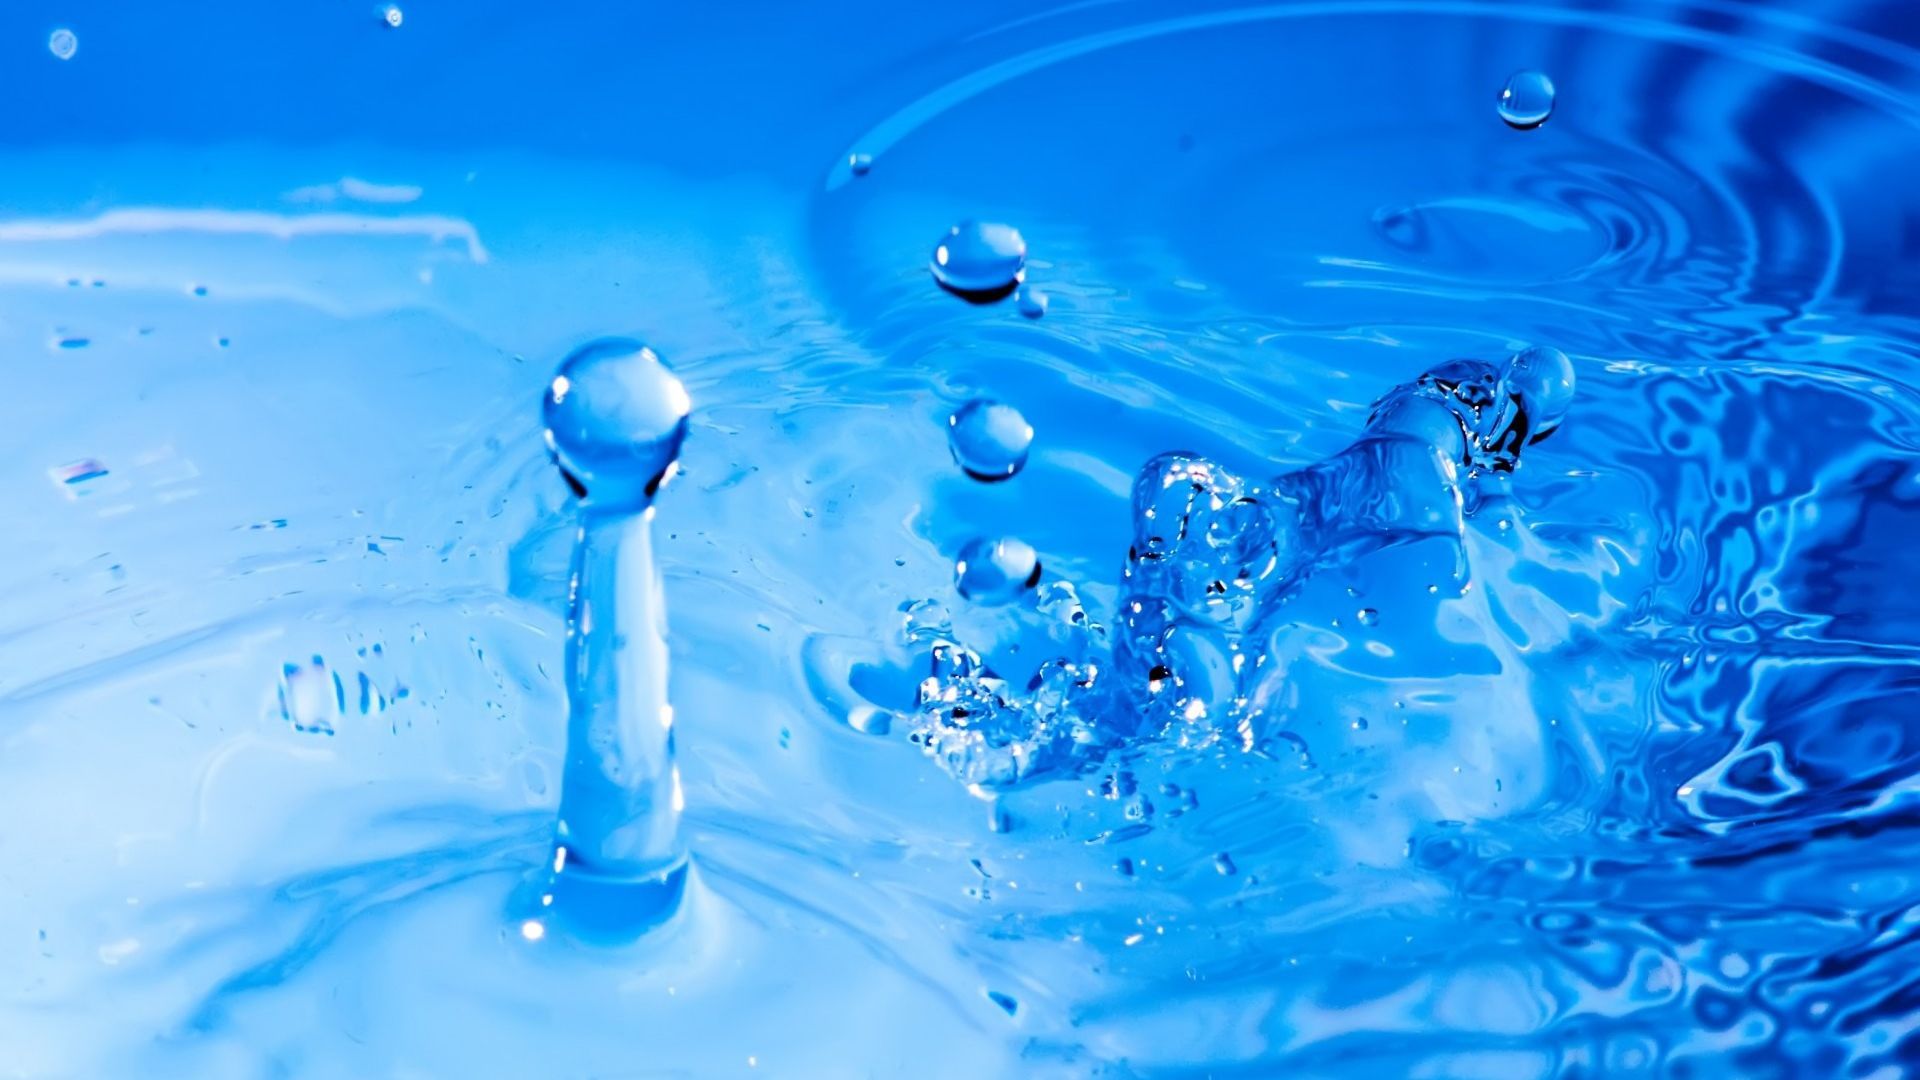 Water Drops Background Free Image